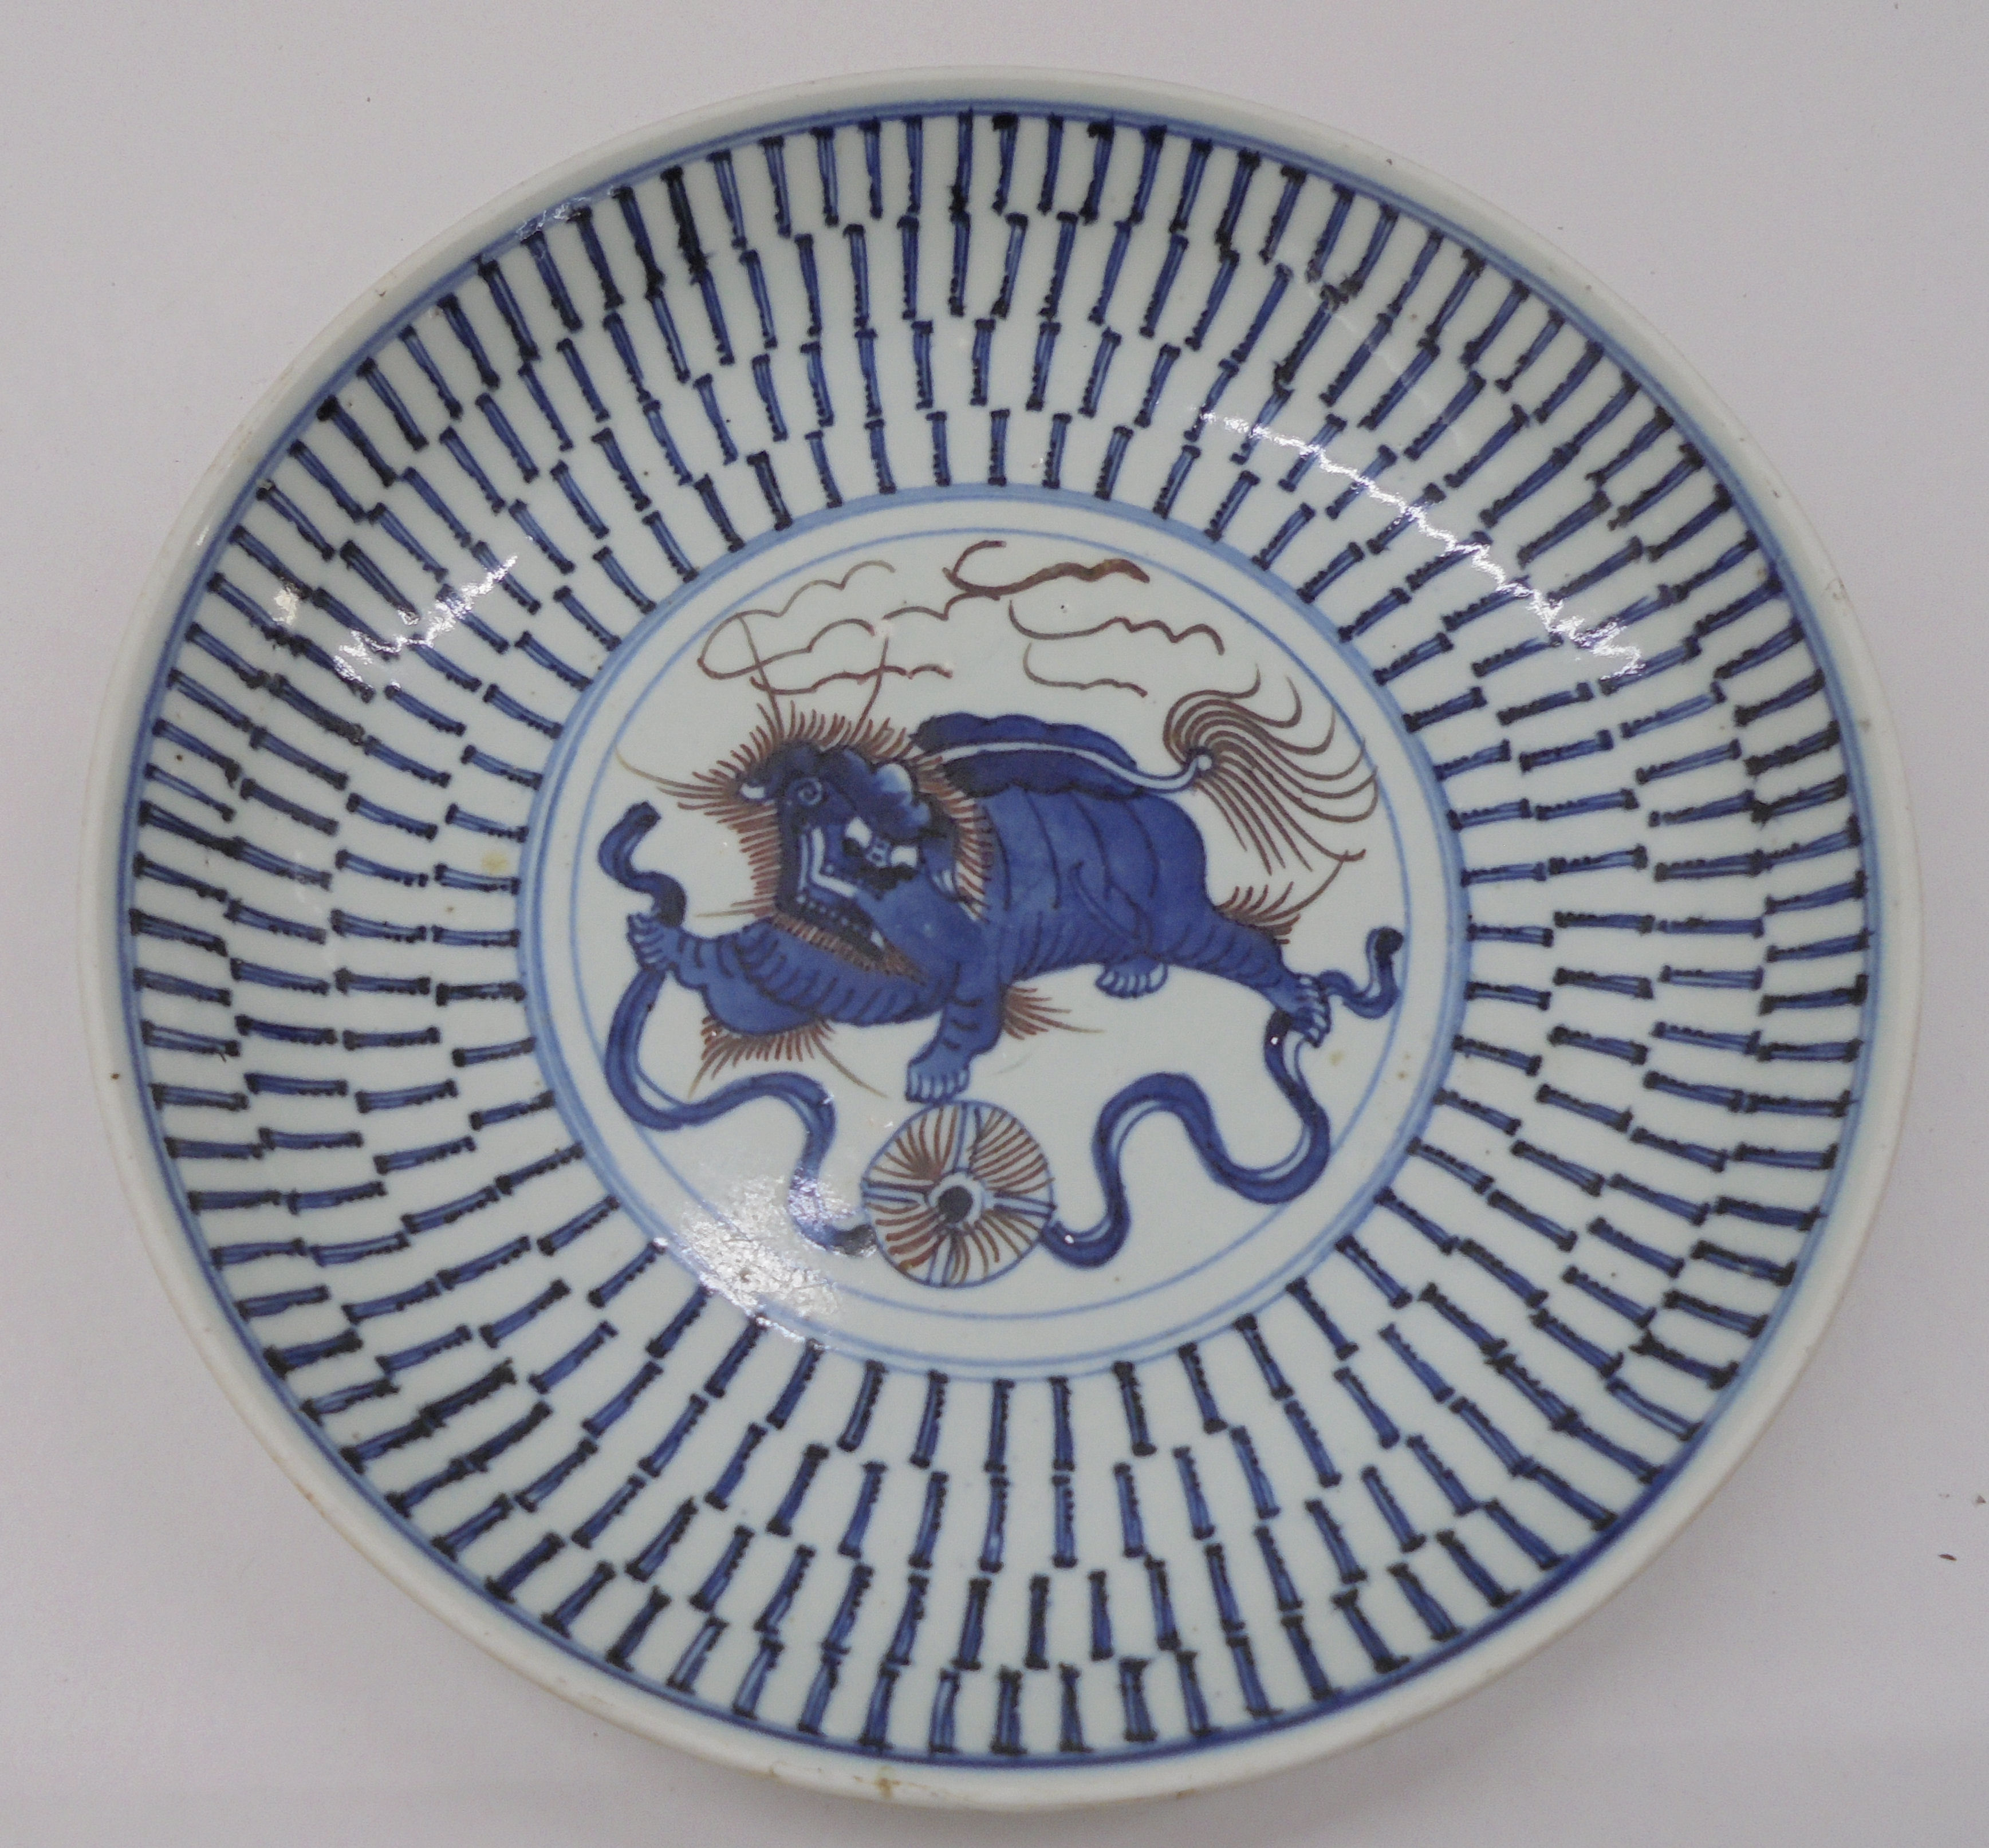 A 19thC Chinese provincial footed porcelain dish, decorated in blue, brown and white with a dragon-